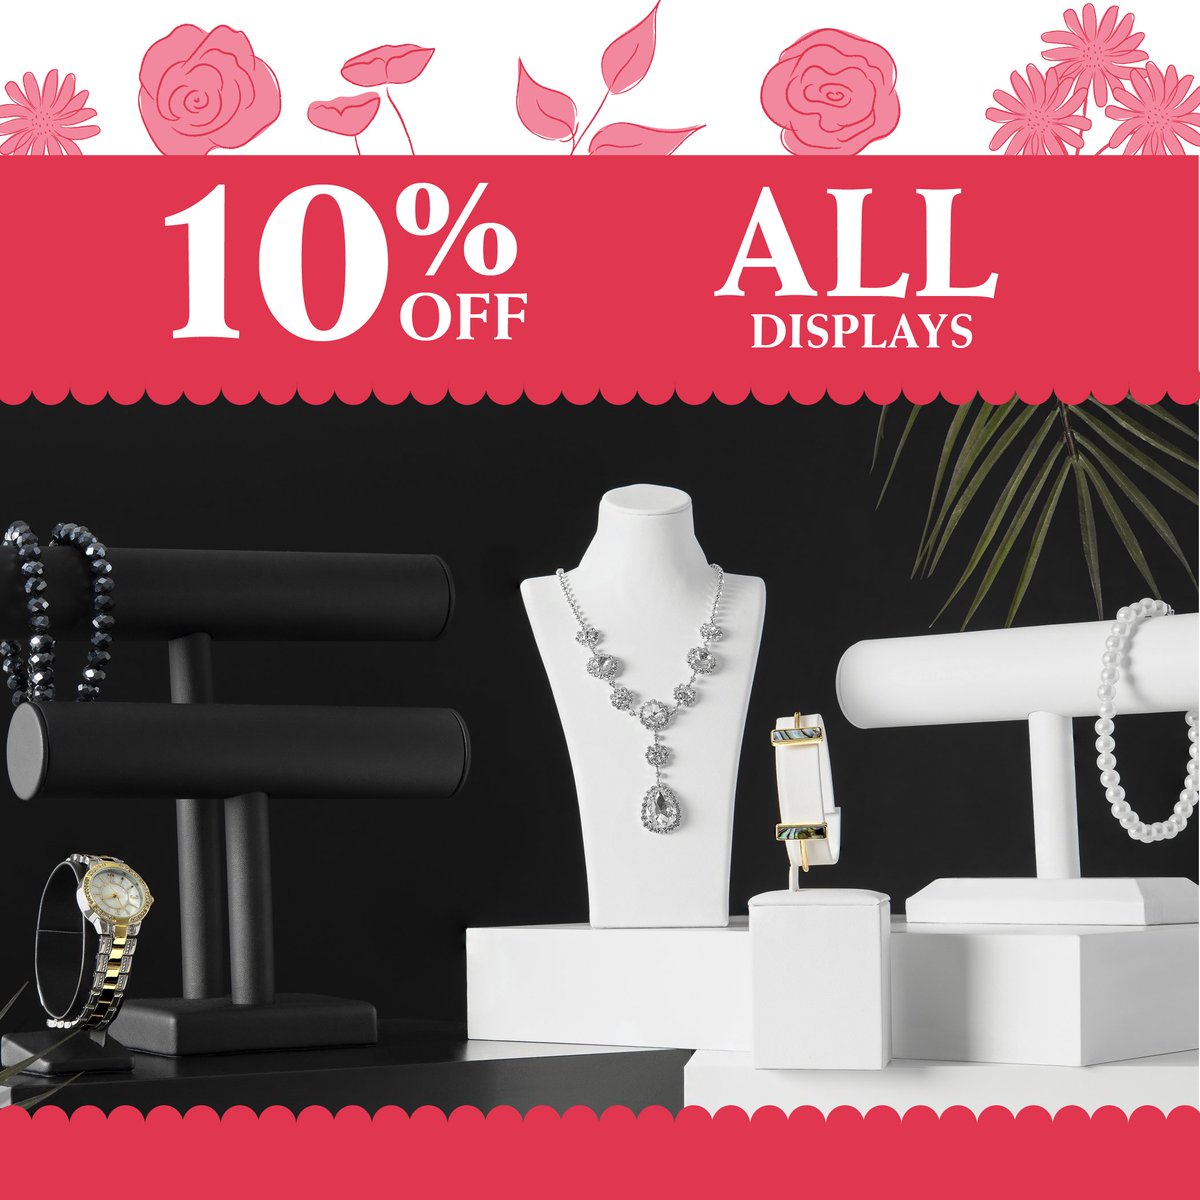 10% off on #ringdisplays, #bases, & oh-so-much-more Click here for coupon allurepack.com/discount/Val10…
#earringdisplays #neckdisplays  #pendantdisplay #bracelets #chaindisplays #sale #showoffjewelry #jewelrystore #jewelrydisplays #allurepack